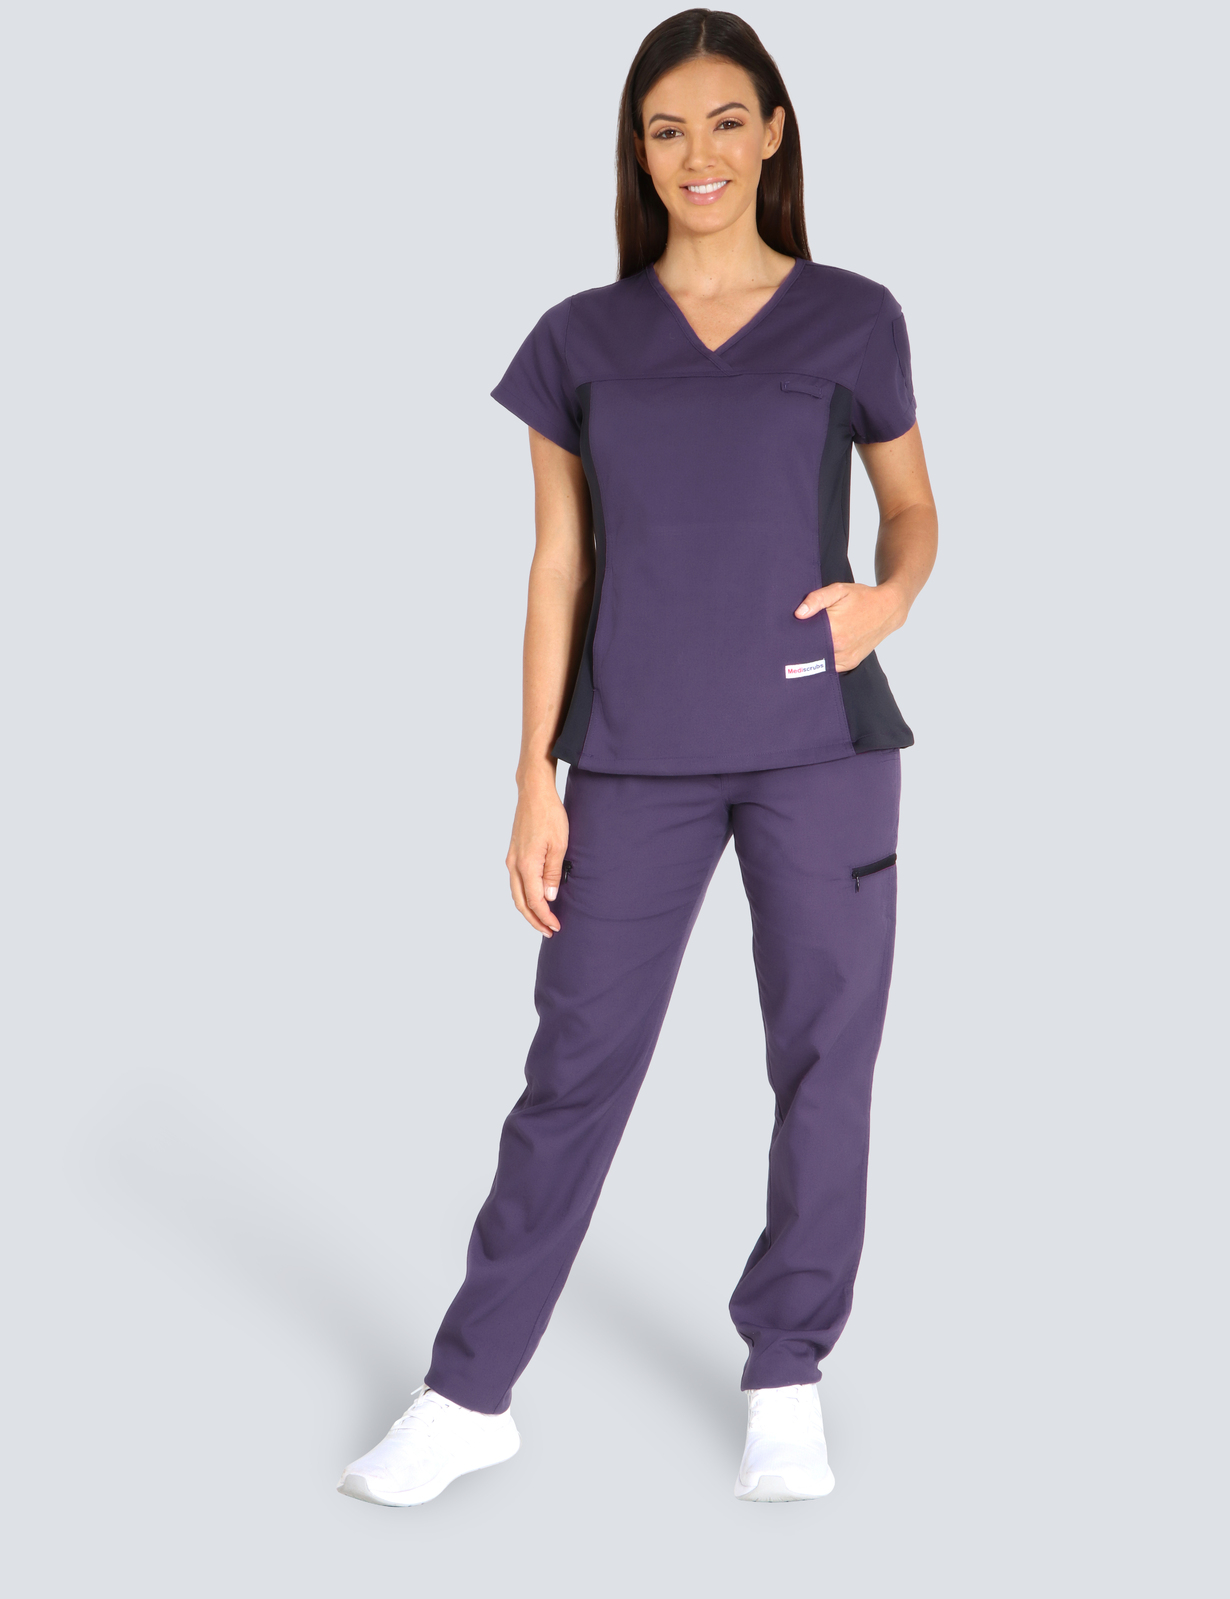 Toowoomba Hospital Pharmacy Assistant Uniform Set Bundle (Women's Fit Spandex Top and Cargo pants in Aubergine + Logo) 